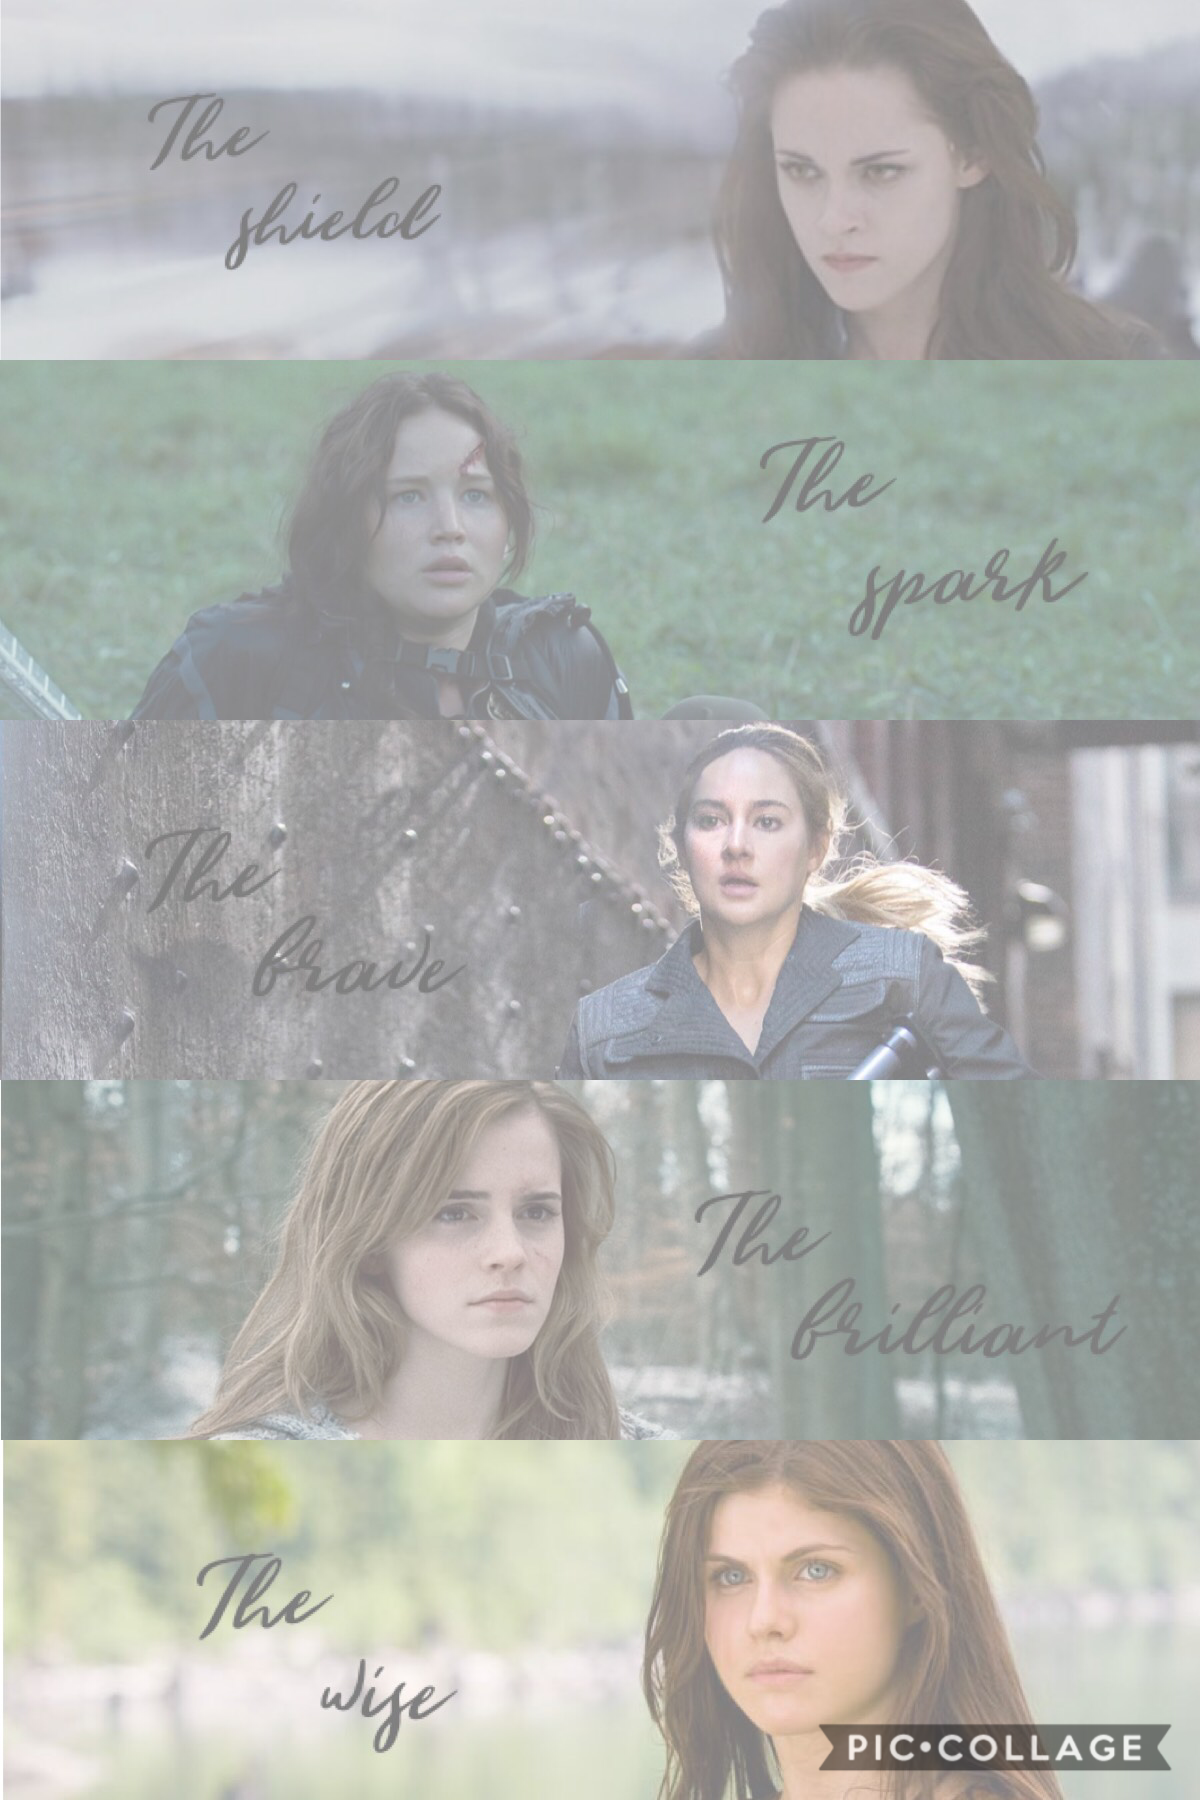 Some of my favorite female book characters and their titles!❤️